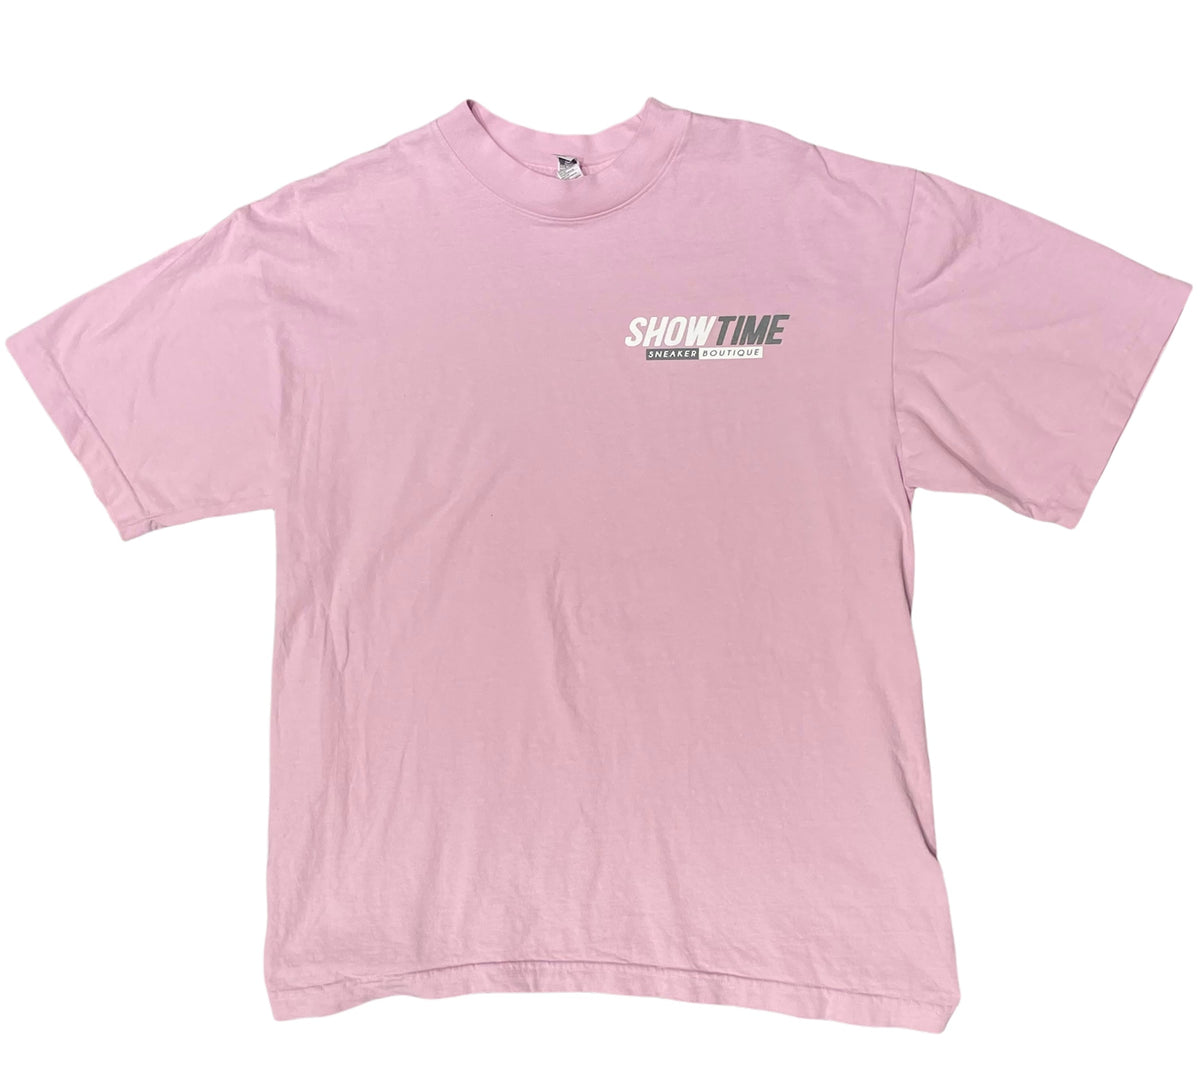 Showtime Sneaker Boutique Tee Pink